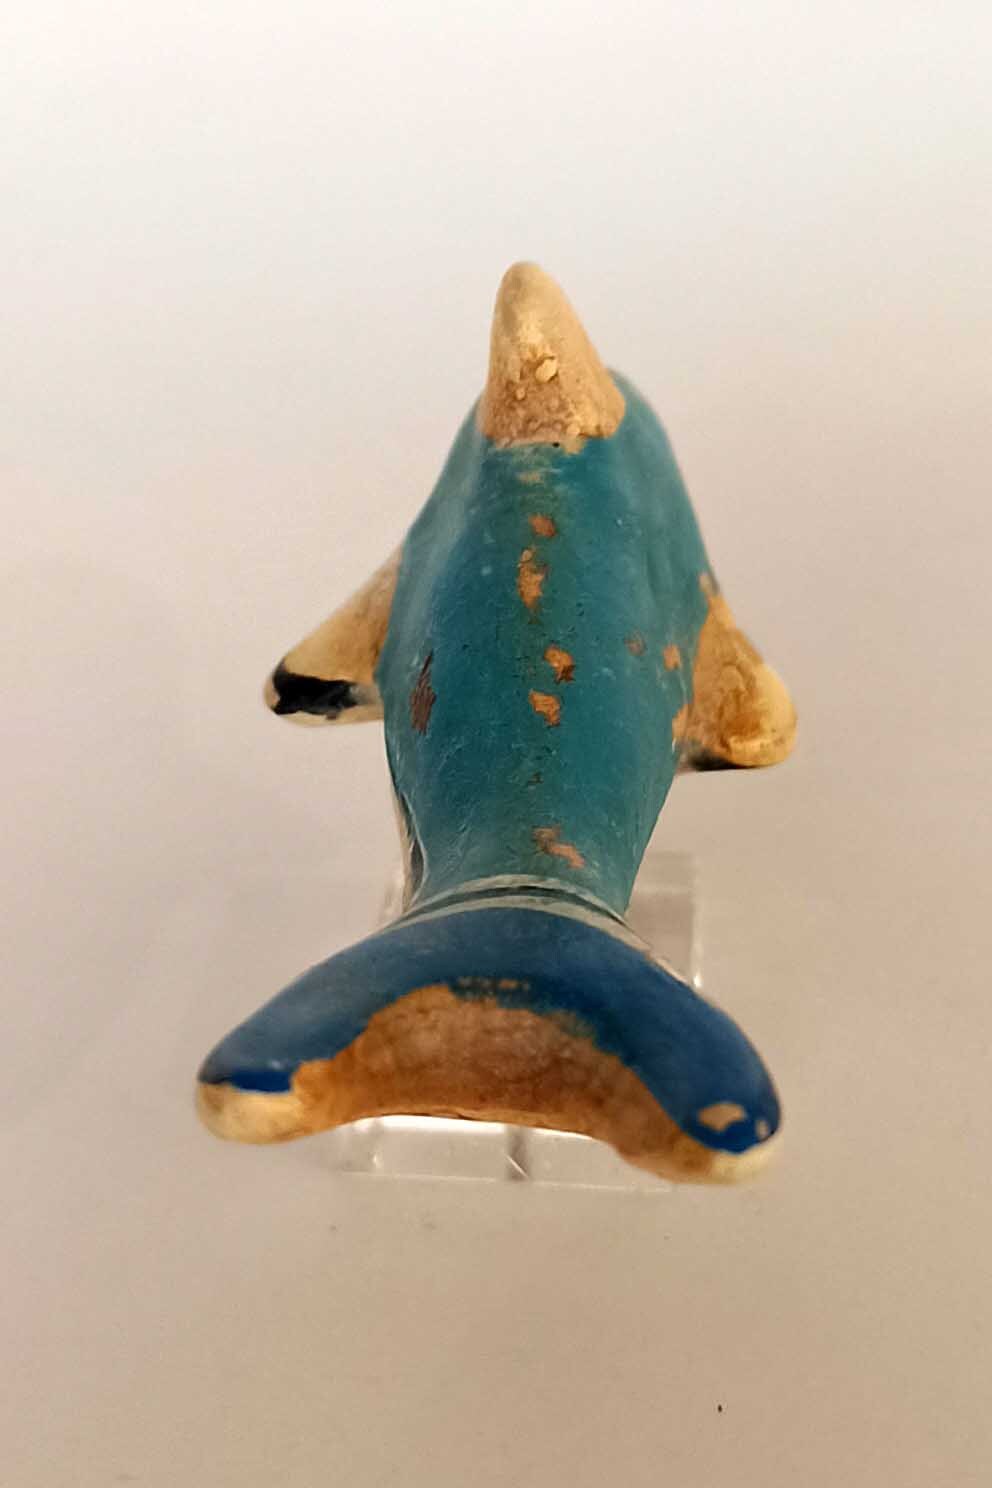 Dolphin from Thera  - 1700 BC - Symbol of Divine Protection, Guidance - Miniature - Plexiglass Base - Museum Reproduction - Ceramic Artifact